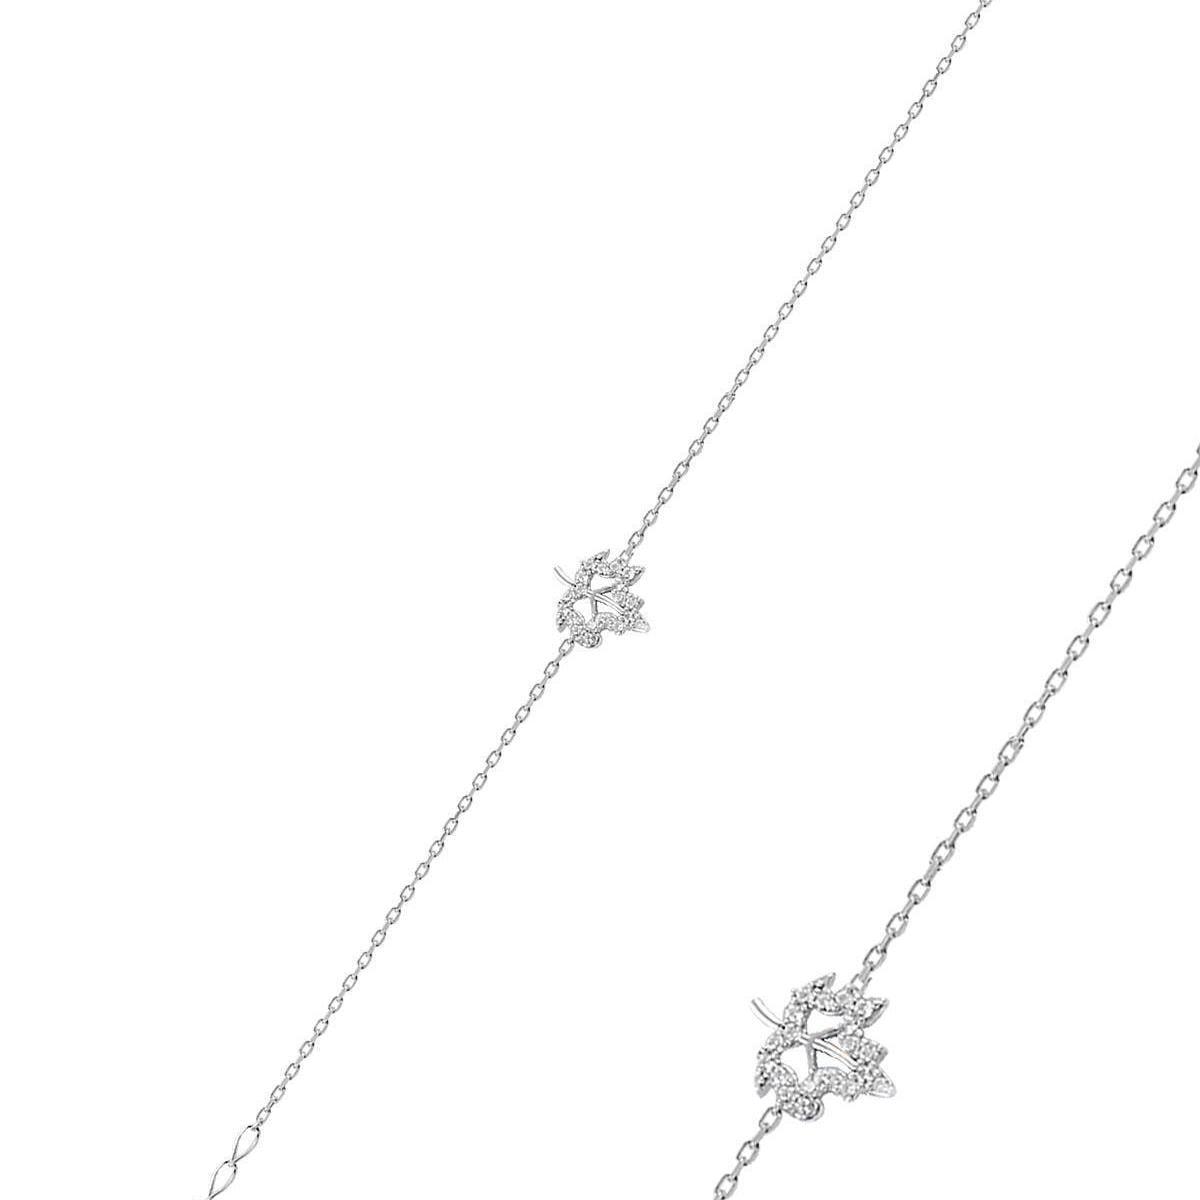 Zircon Maple Leaf Silver Bracelet • Bridesmaid Gift For Wedding - Trending Silver Gifts